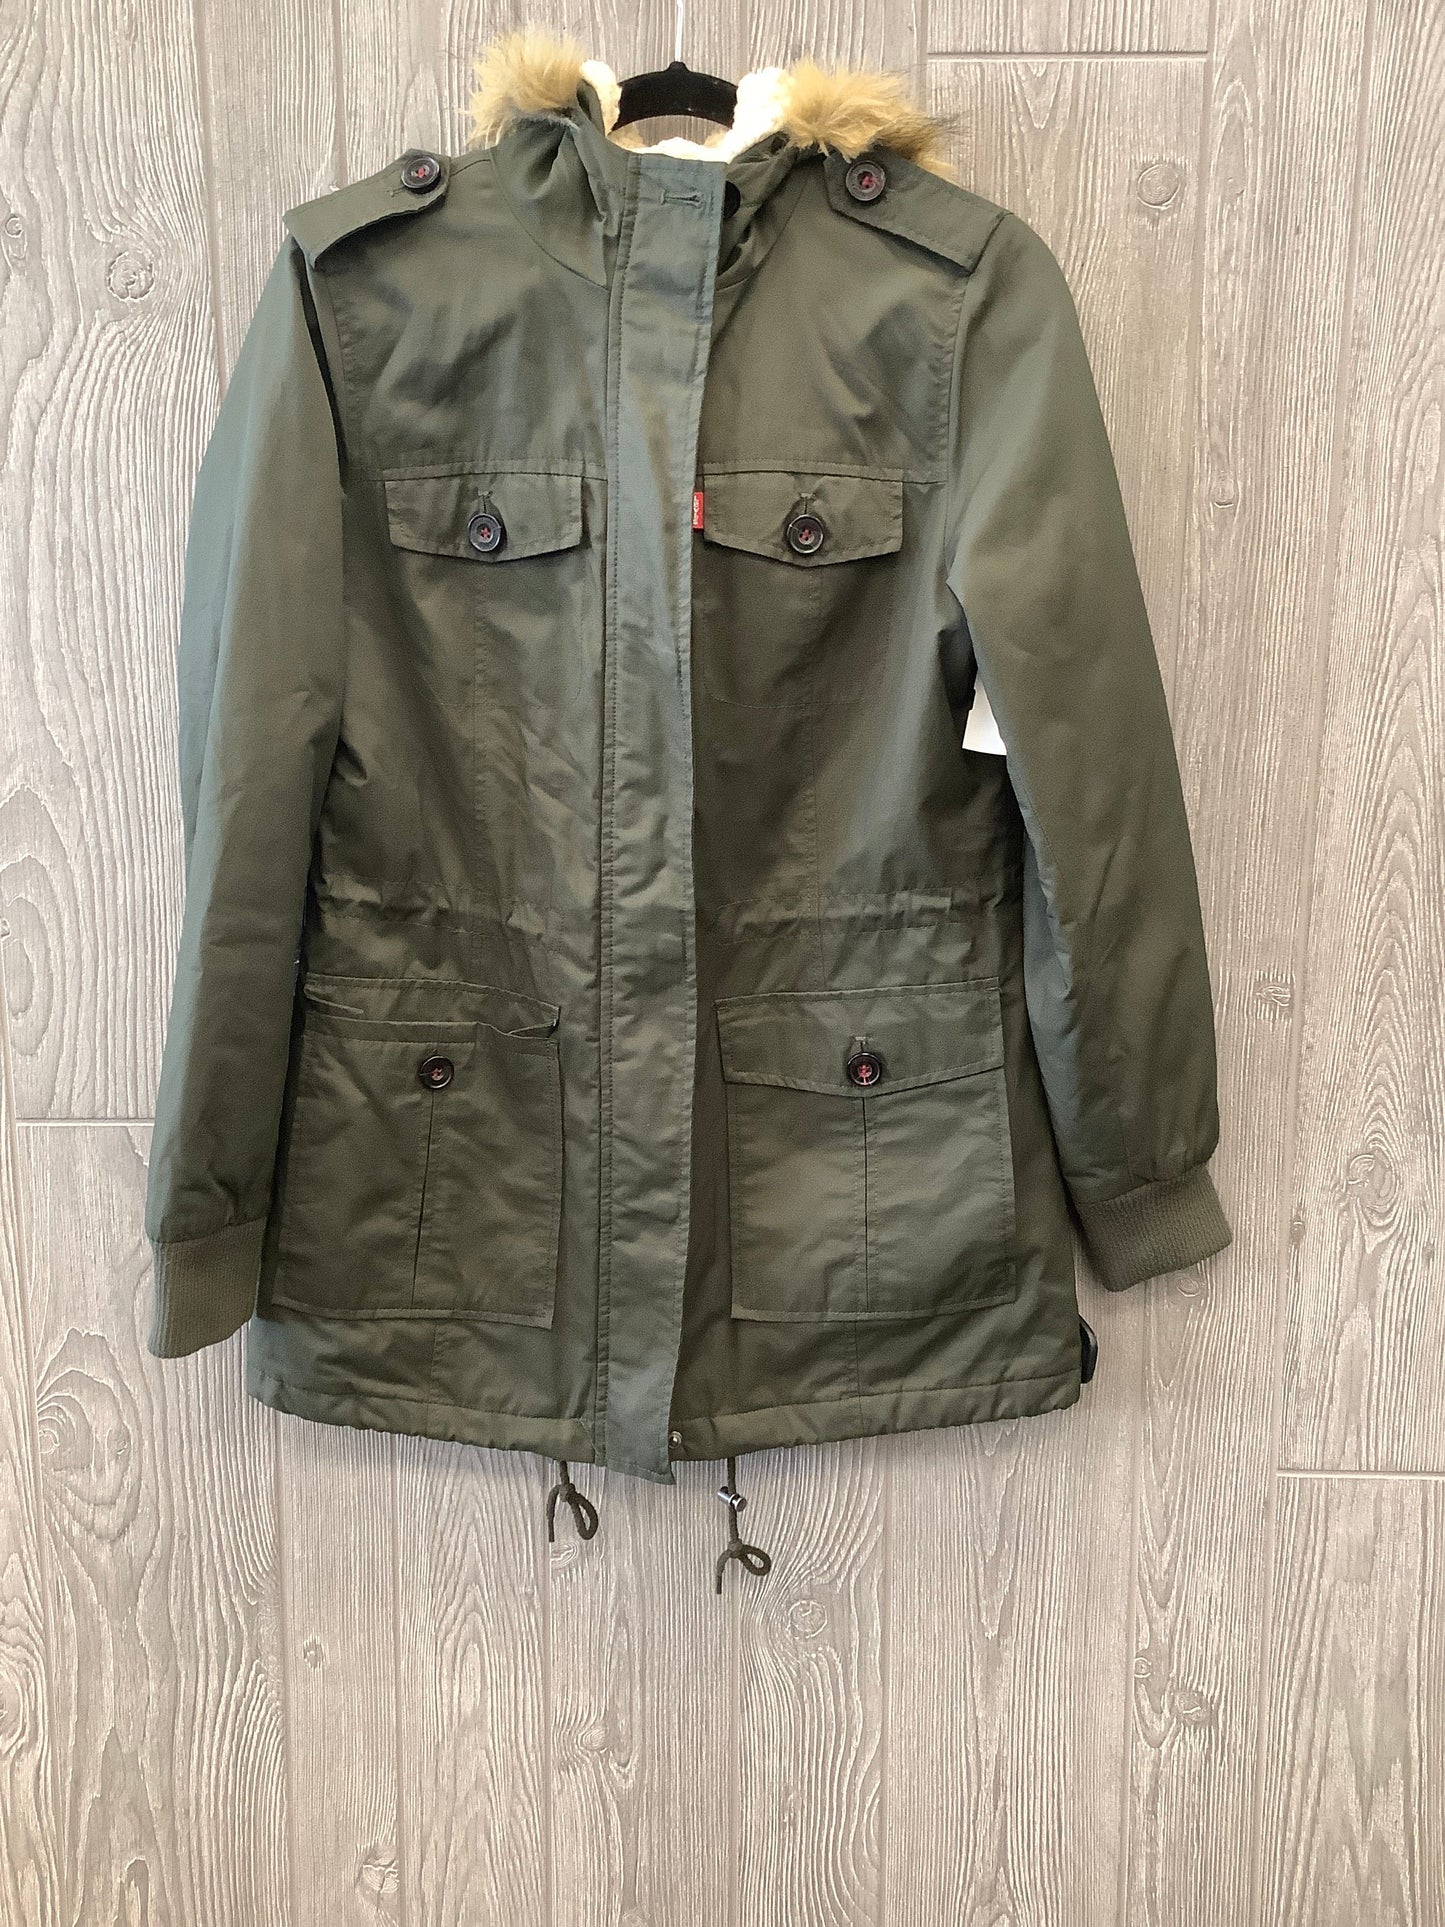 Green Coat Other Levis, Size S